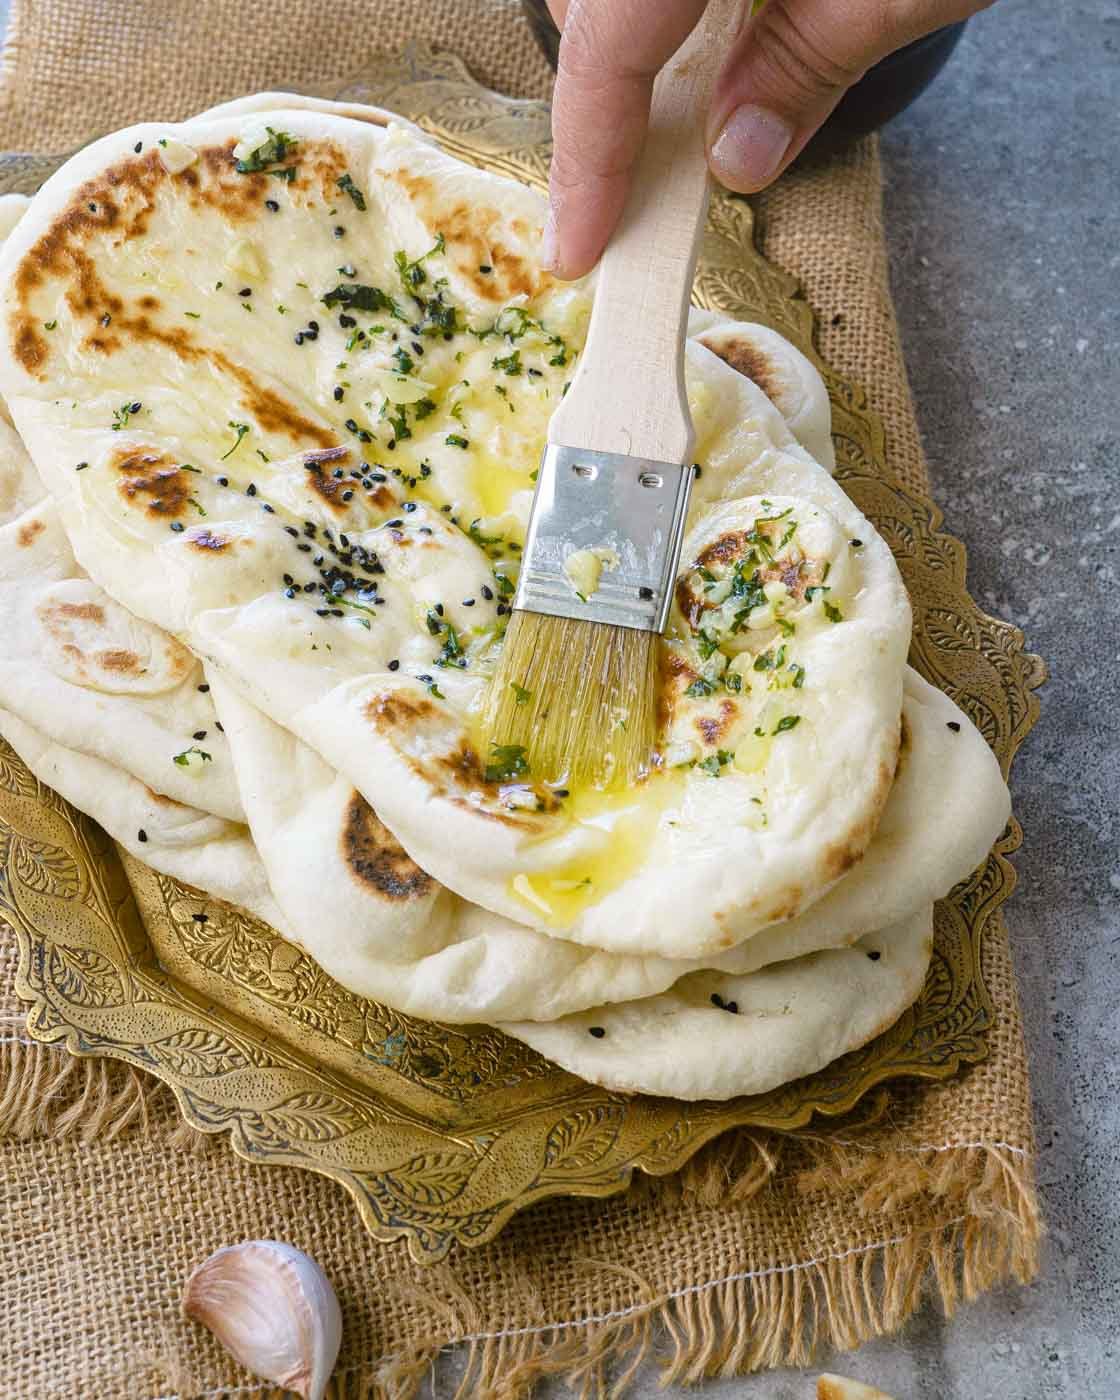 10 Essential Indian Cooking Tools for Making Perfect Flatbreads